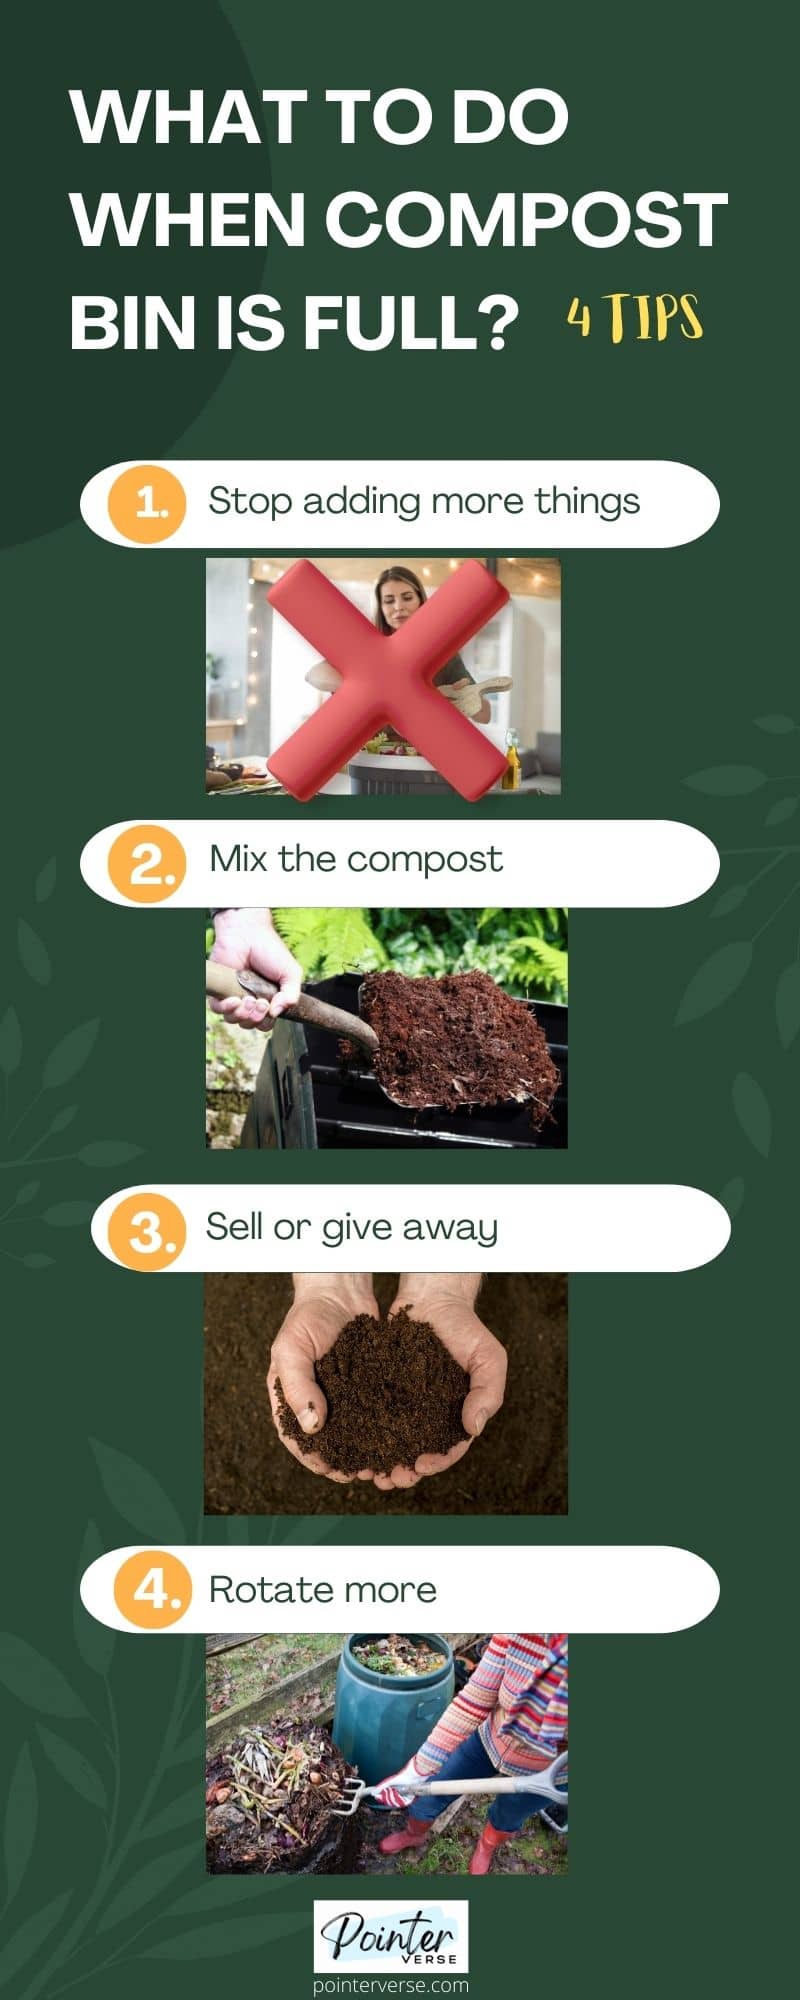 What to do when compost bin is full infographic